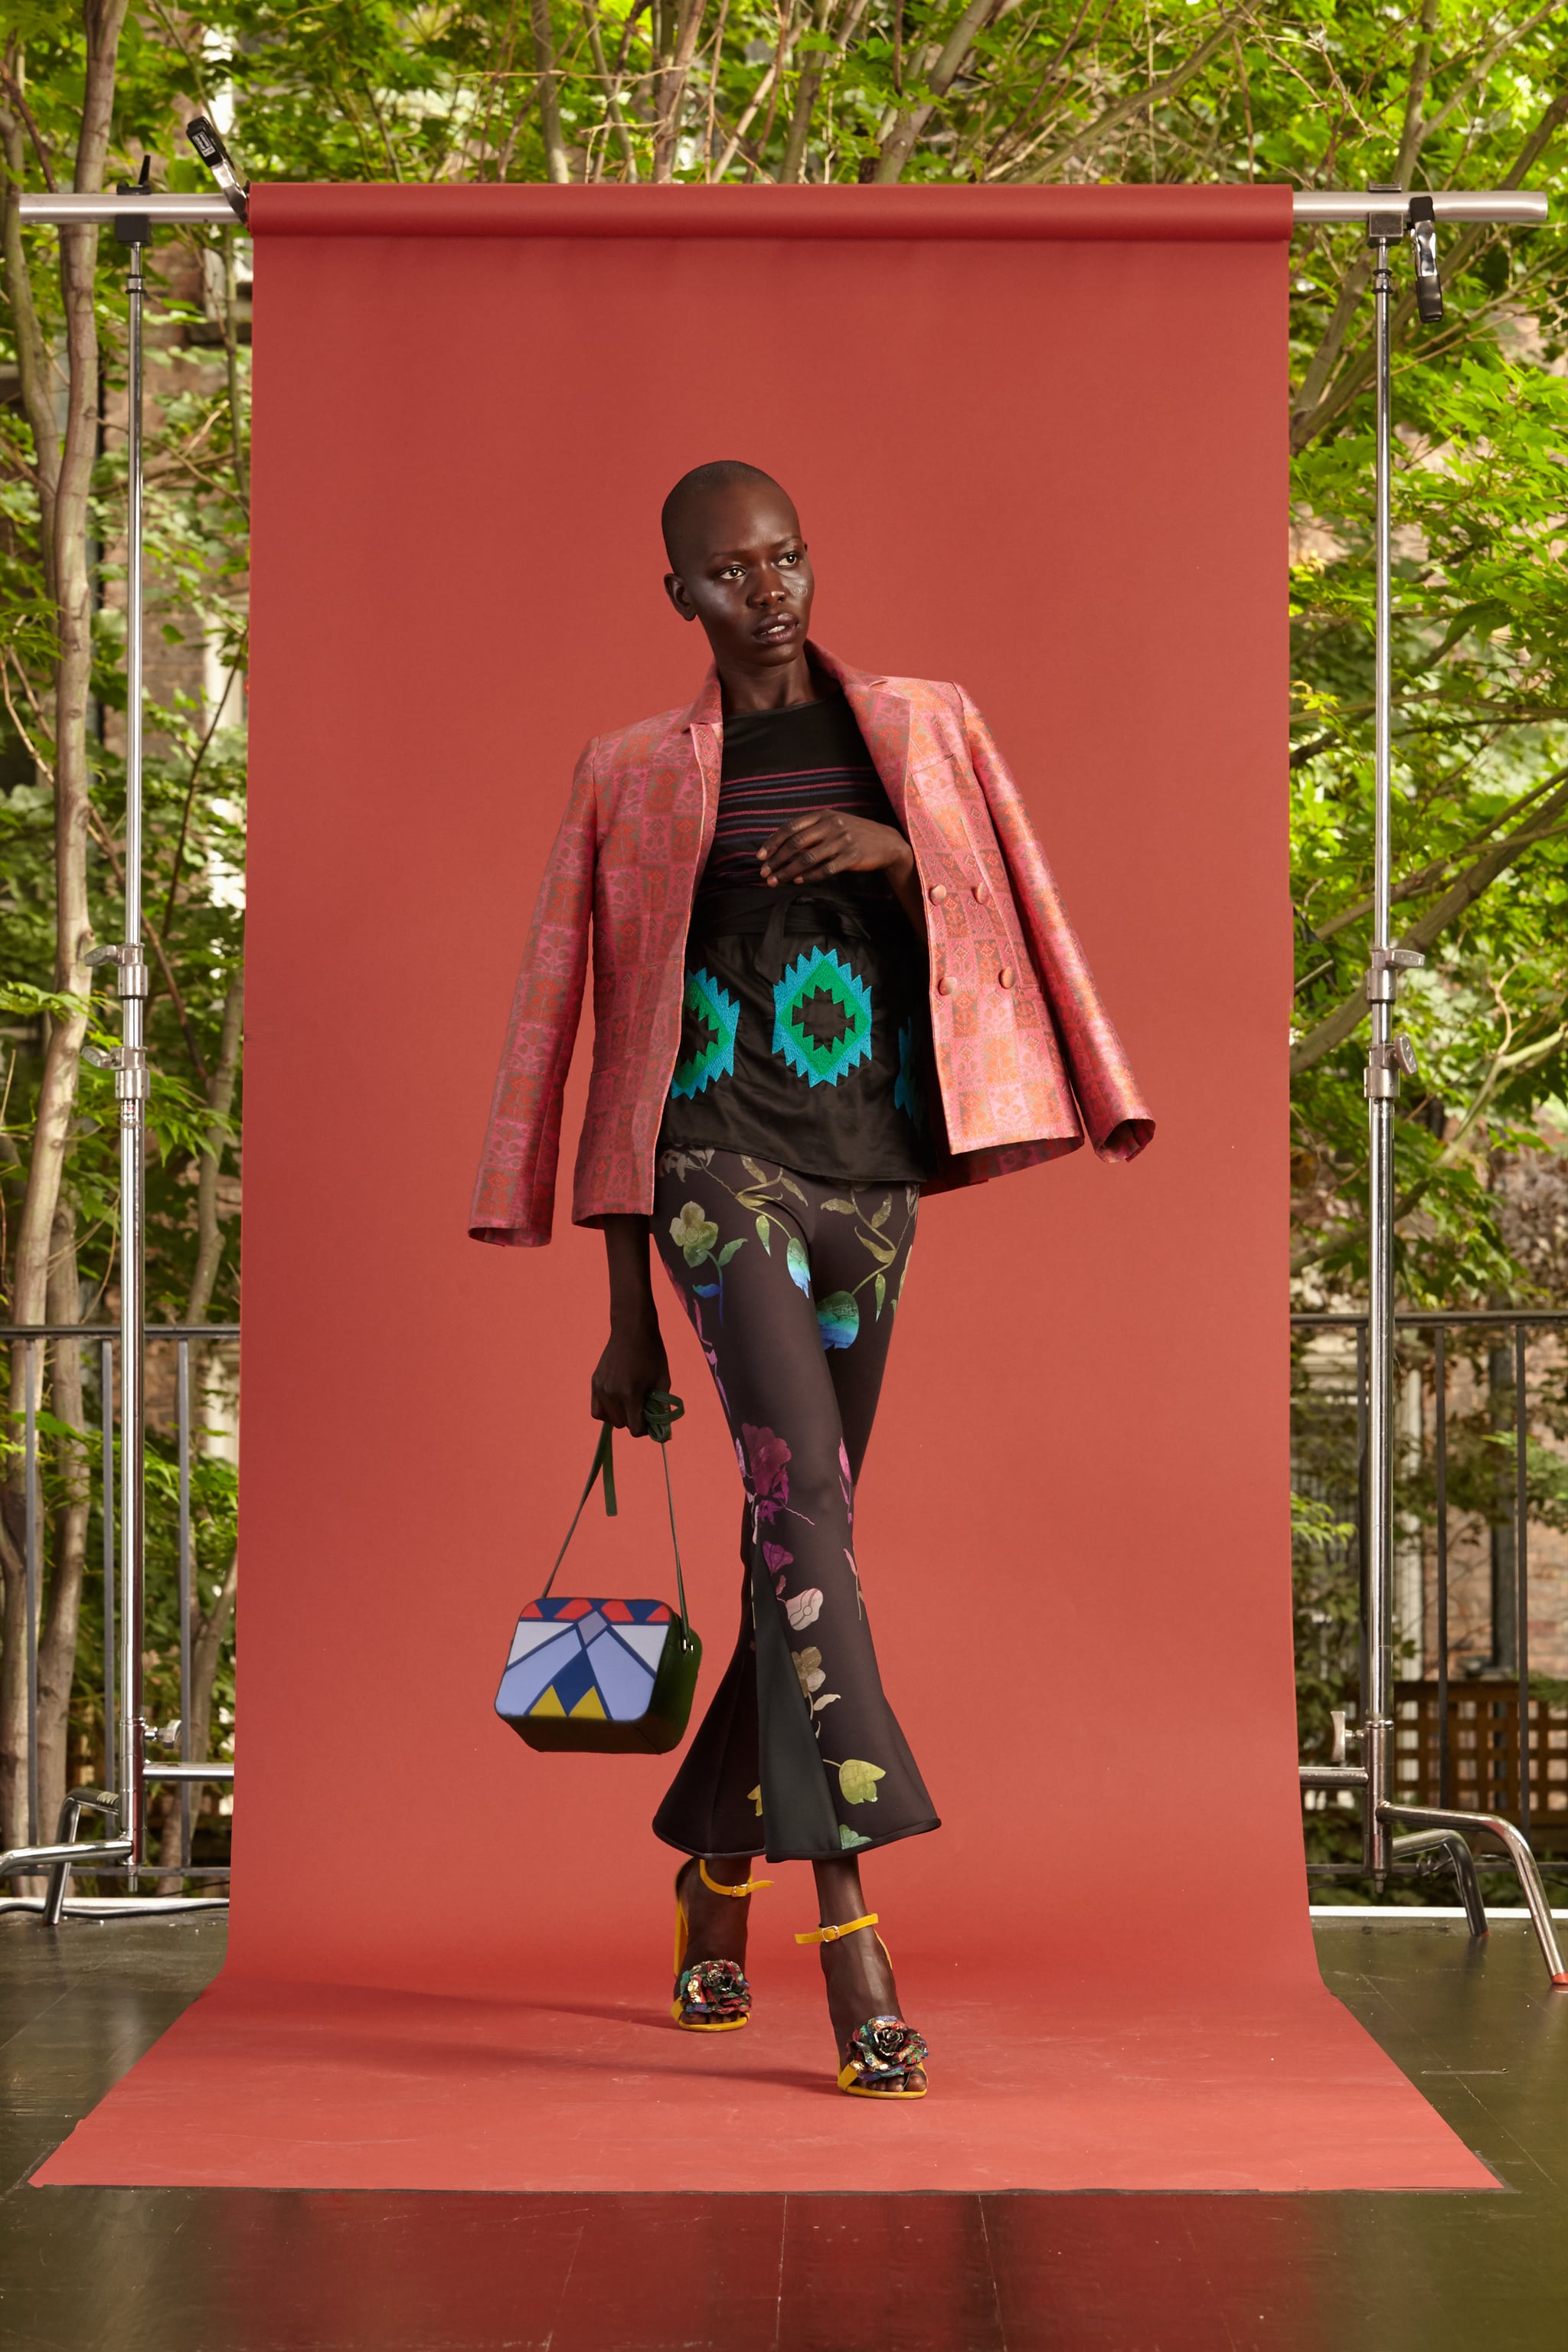 Louis Vuitton Resort '17, 150+ Resort Looks We Want Hanging in Our Closets  Stat